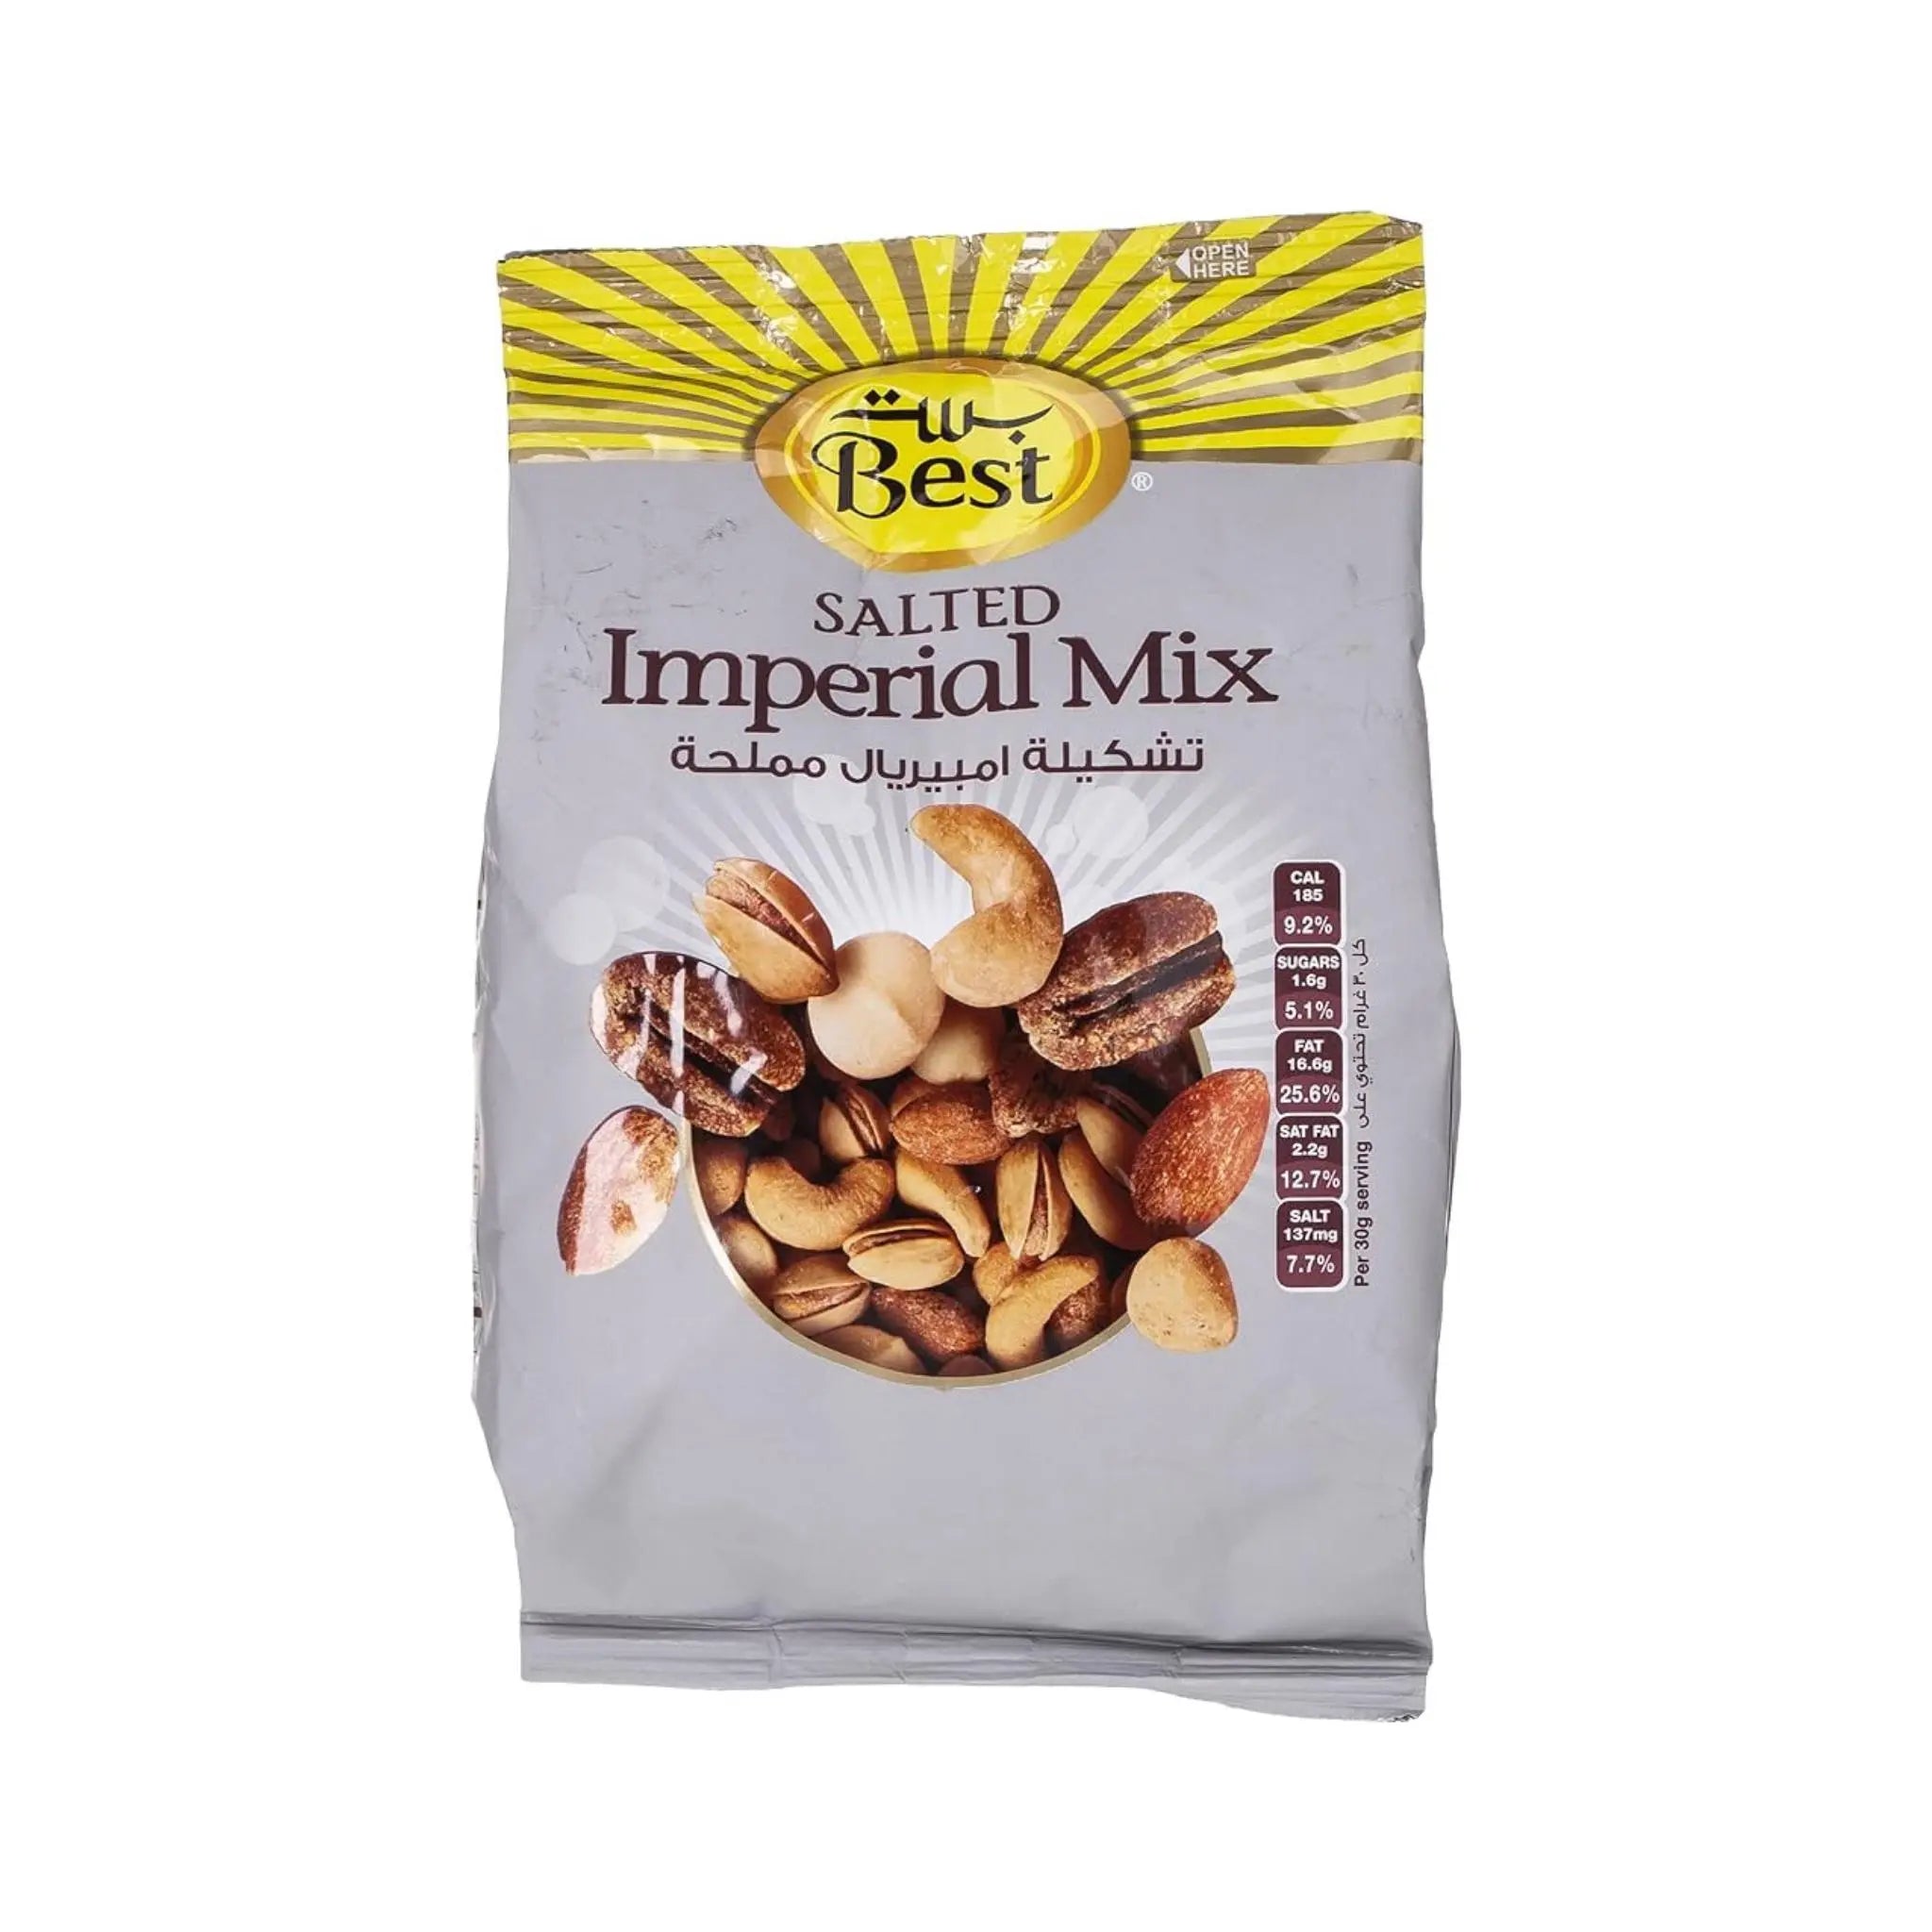 Best Salted Imperial Mix - 12x375g (1 carton) Marino.AE